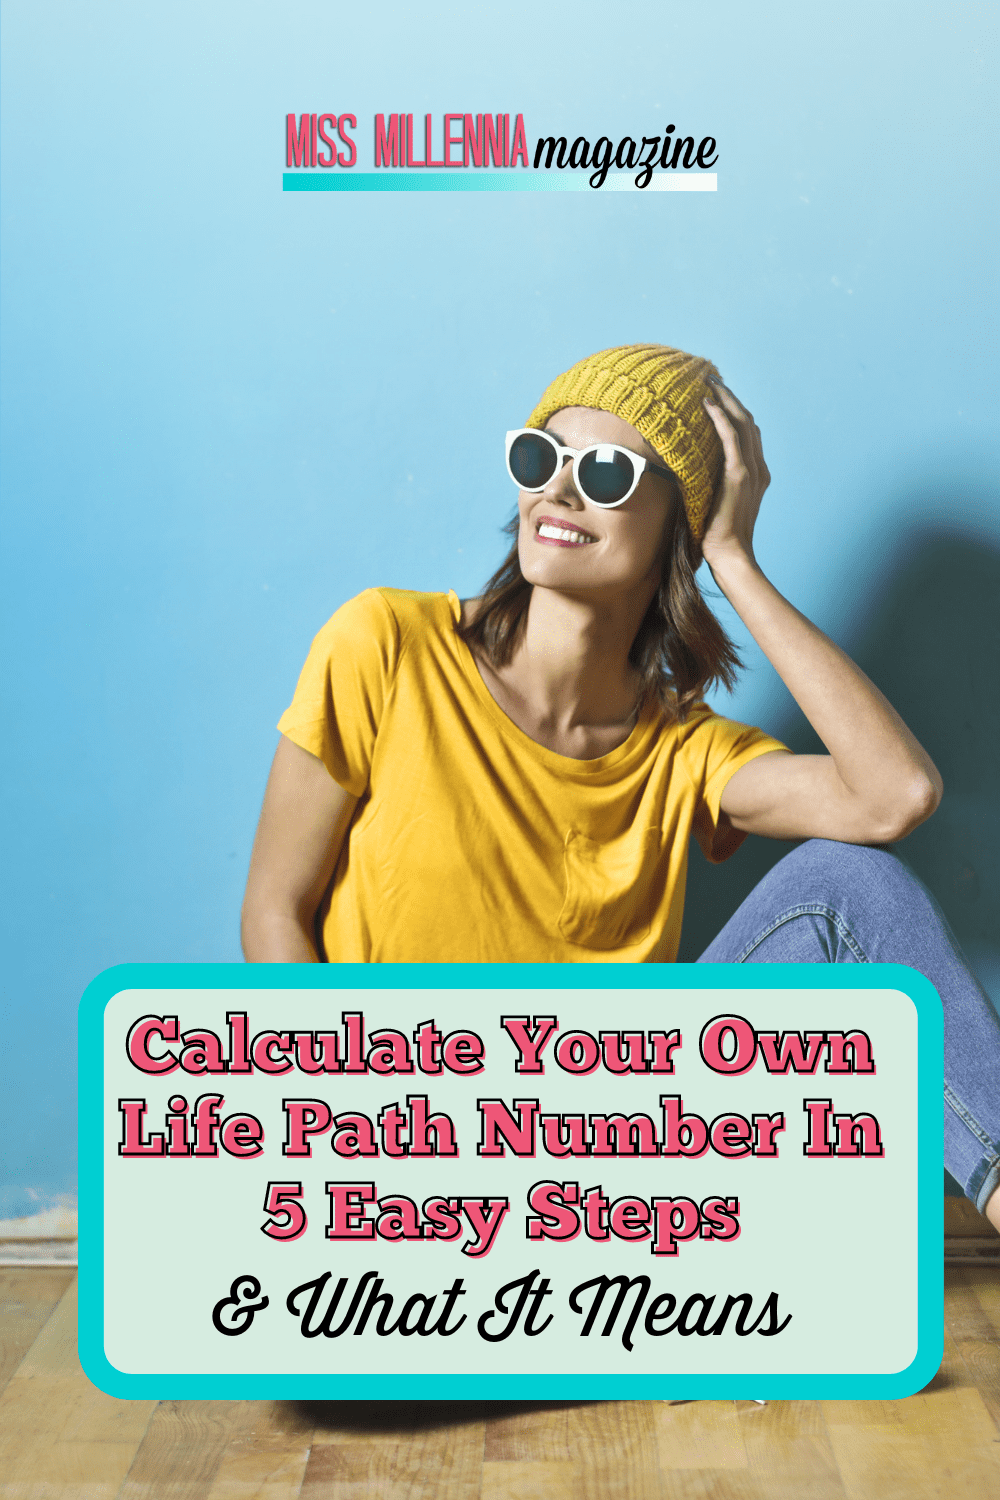 Calculate Your Own Life Path Number In 5 Easy Steps & What It Means